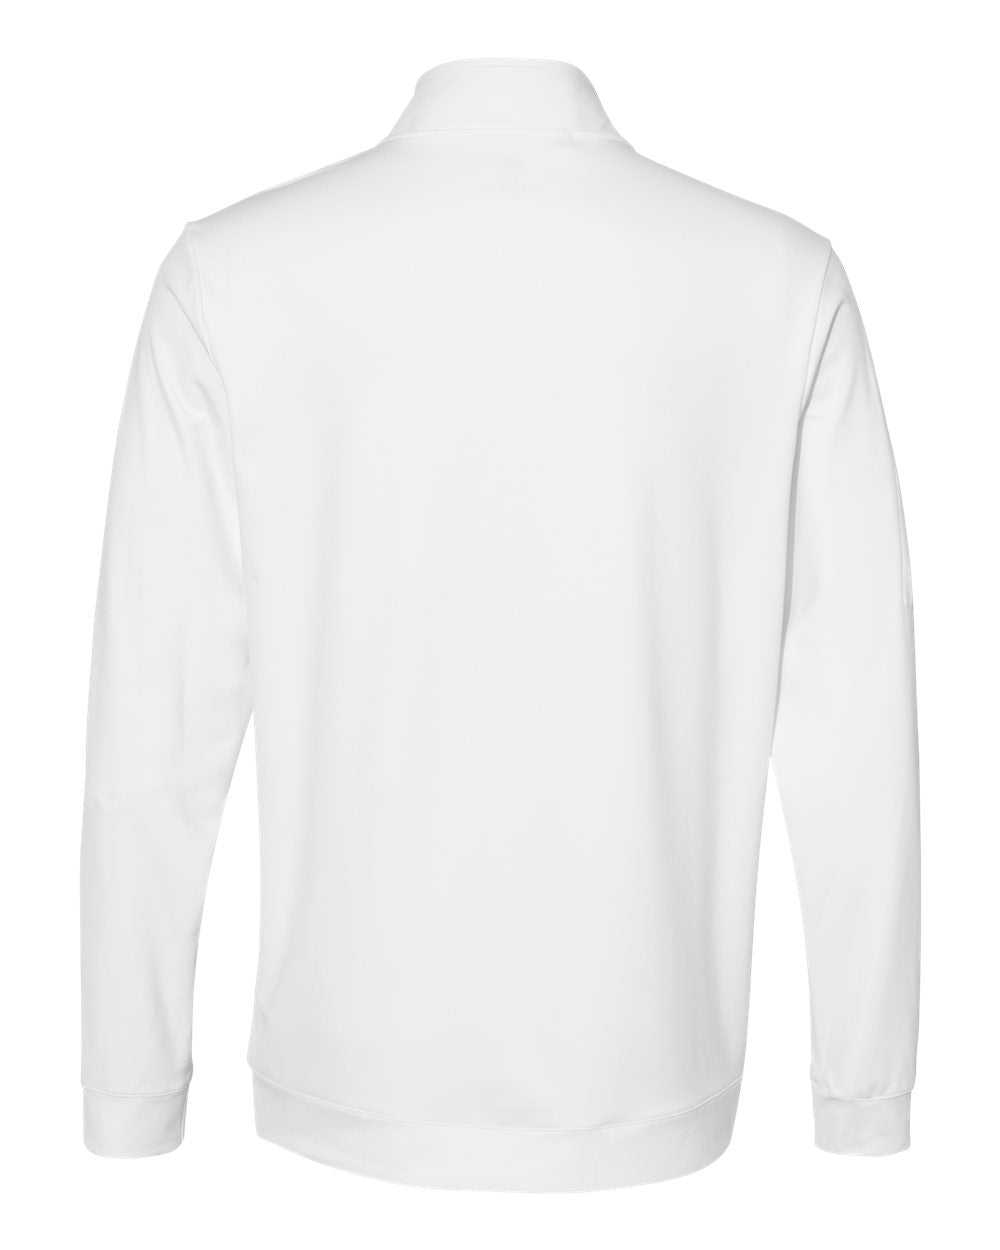 Adidas A295 Performance Textured Quarter-Zip Pullover - White